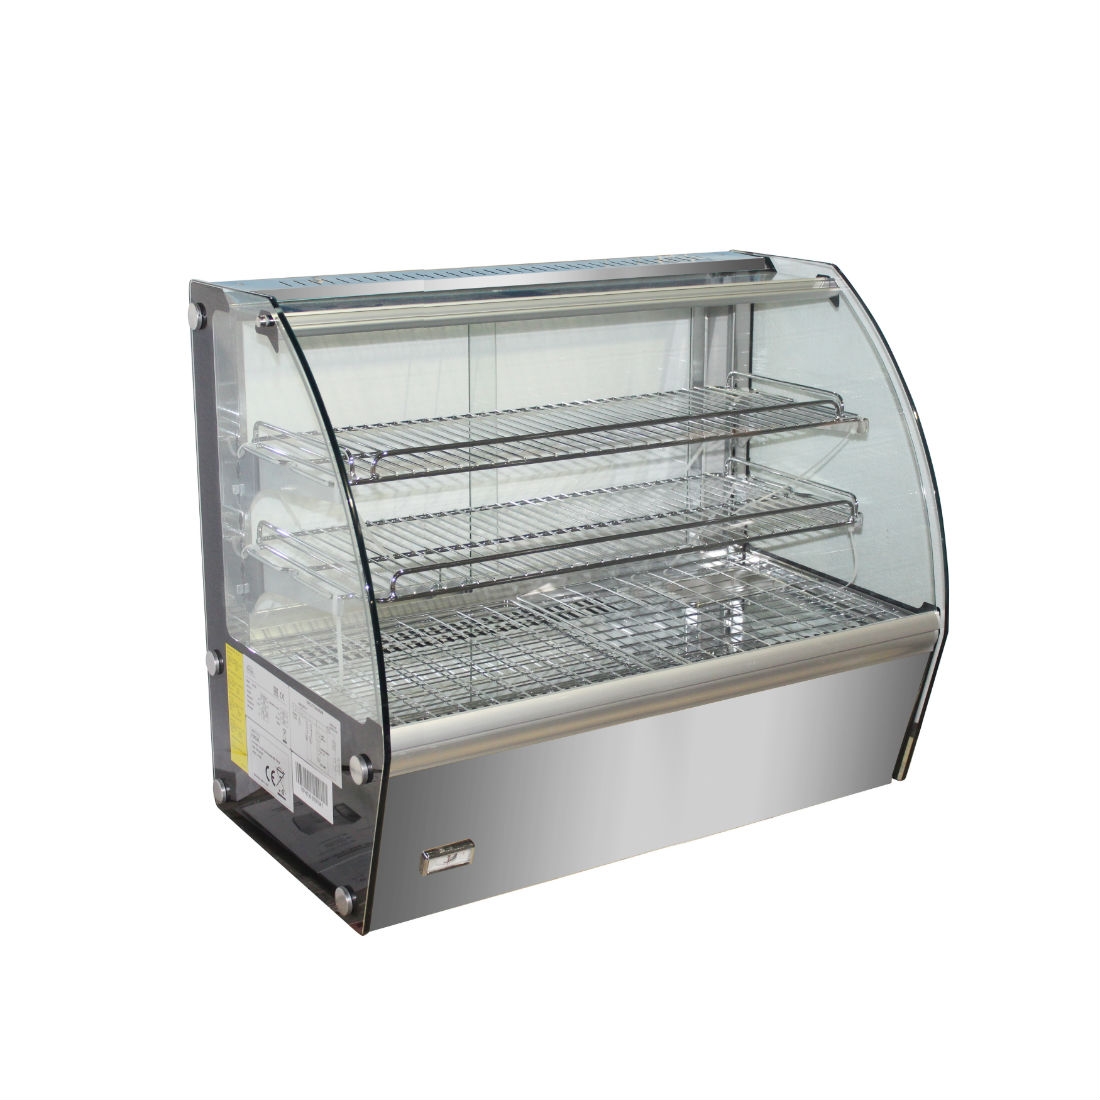 HTH160N - 160 litre Heated Counter-Top Food Display